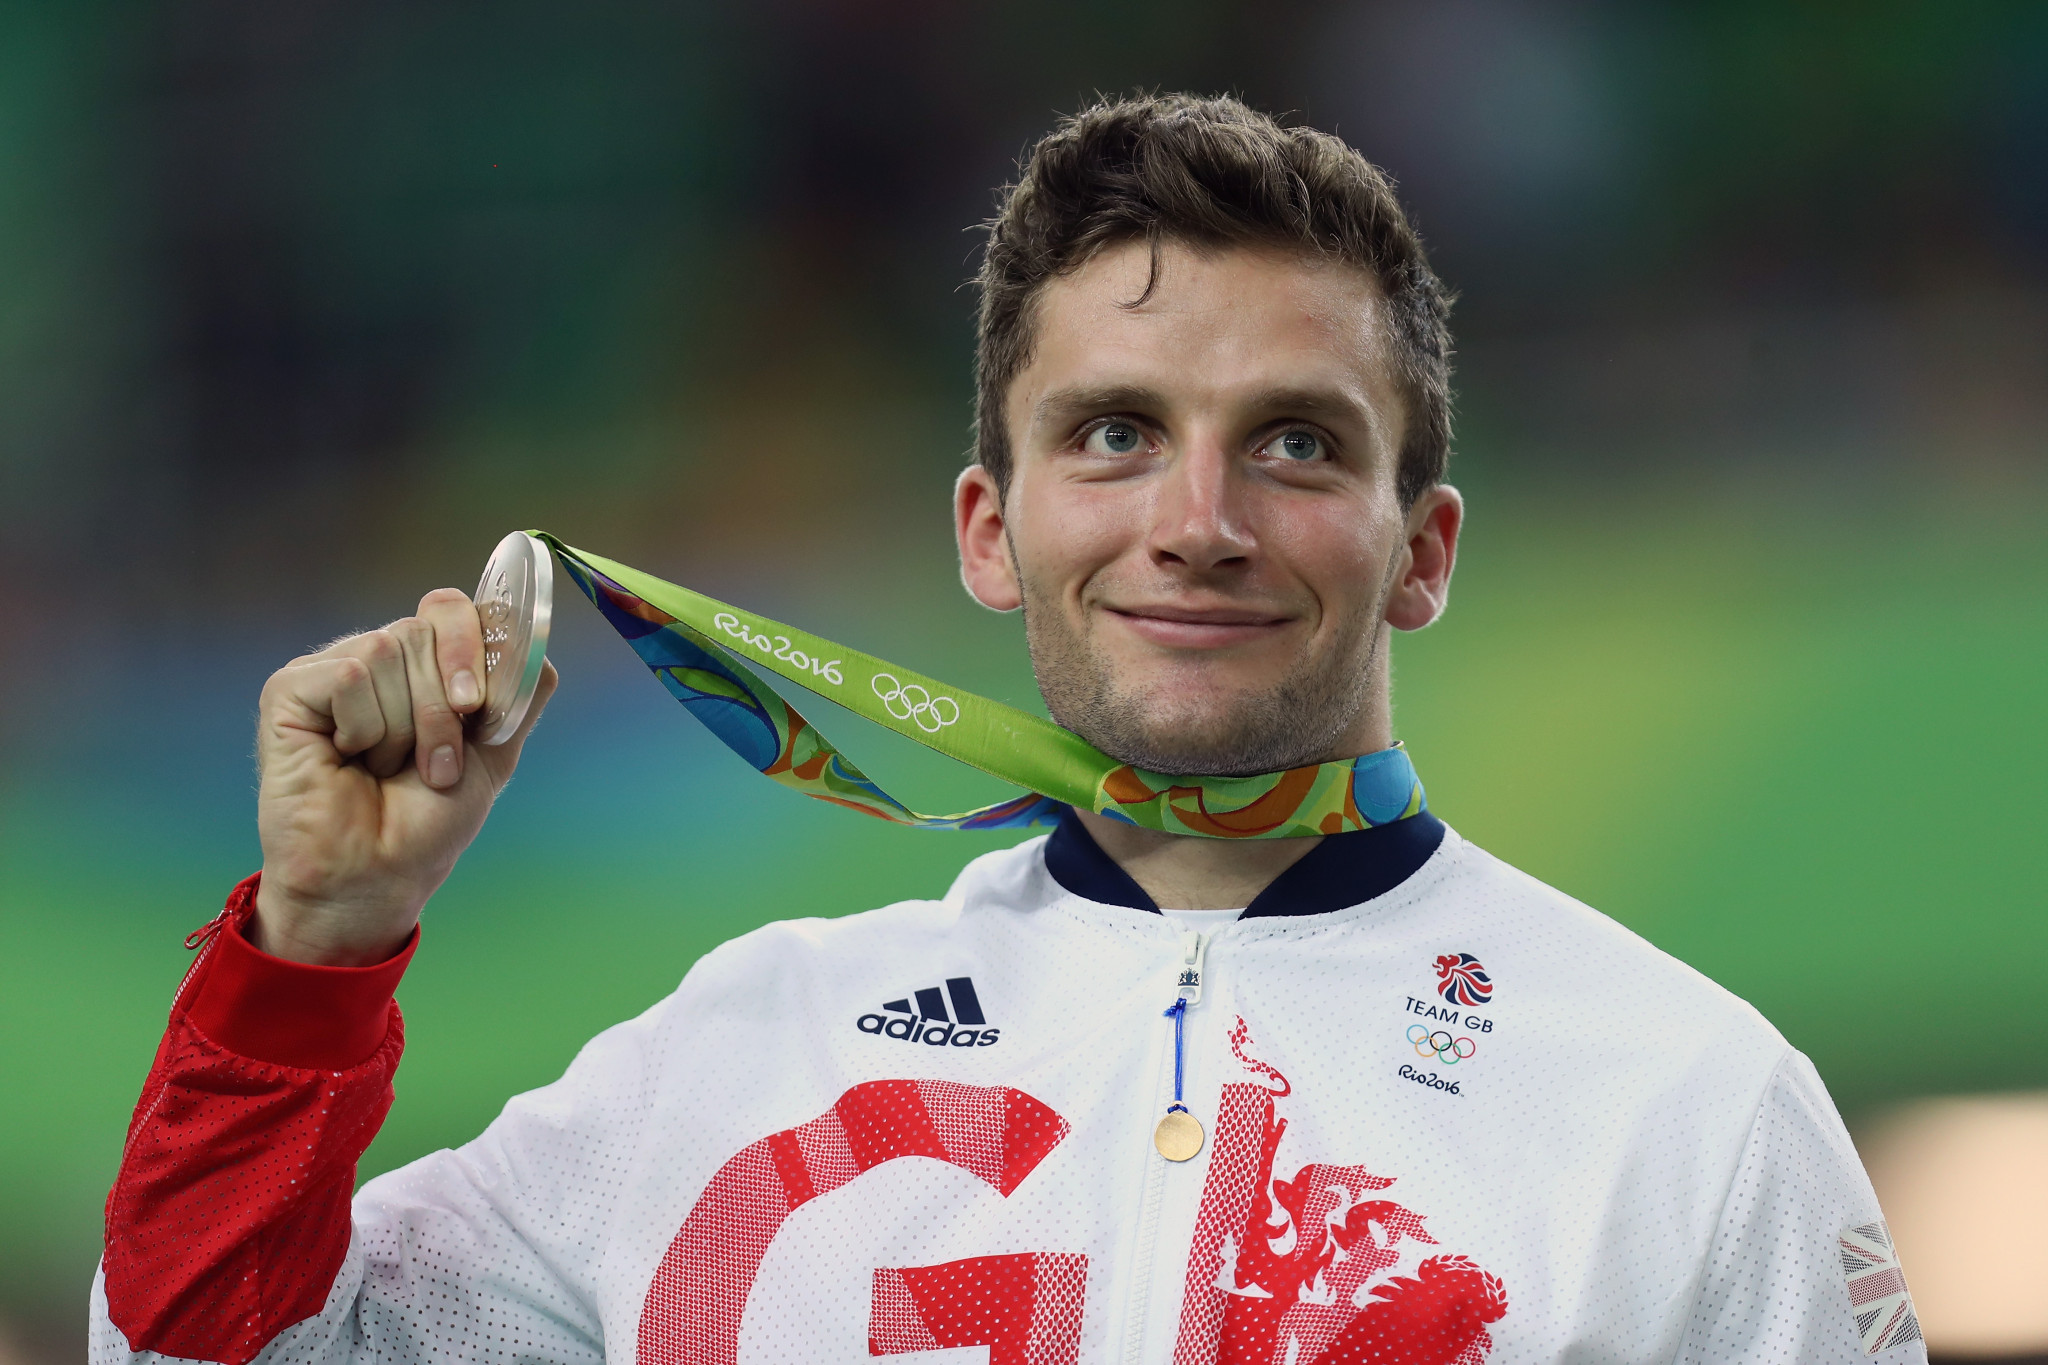 Britain's Rio 2016 Olympic cycling medallist Callum Skinner revealed why athletes would be mentally impacted by the postponement of Tokyo 2020 ©Getty Images